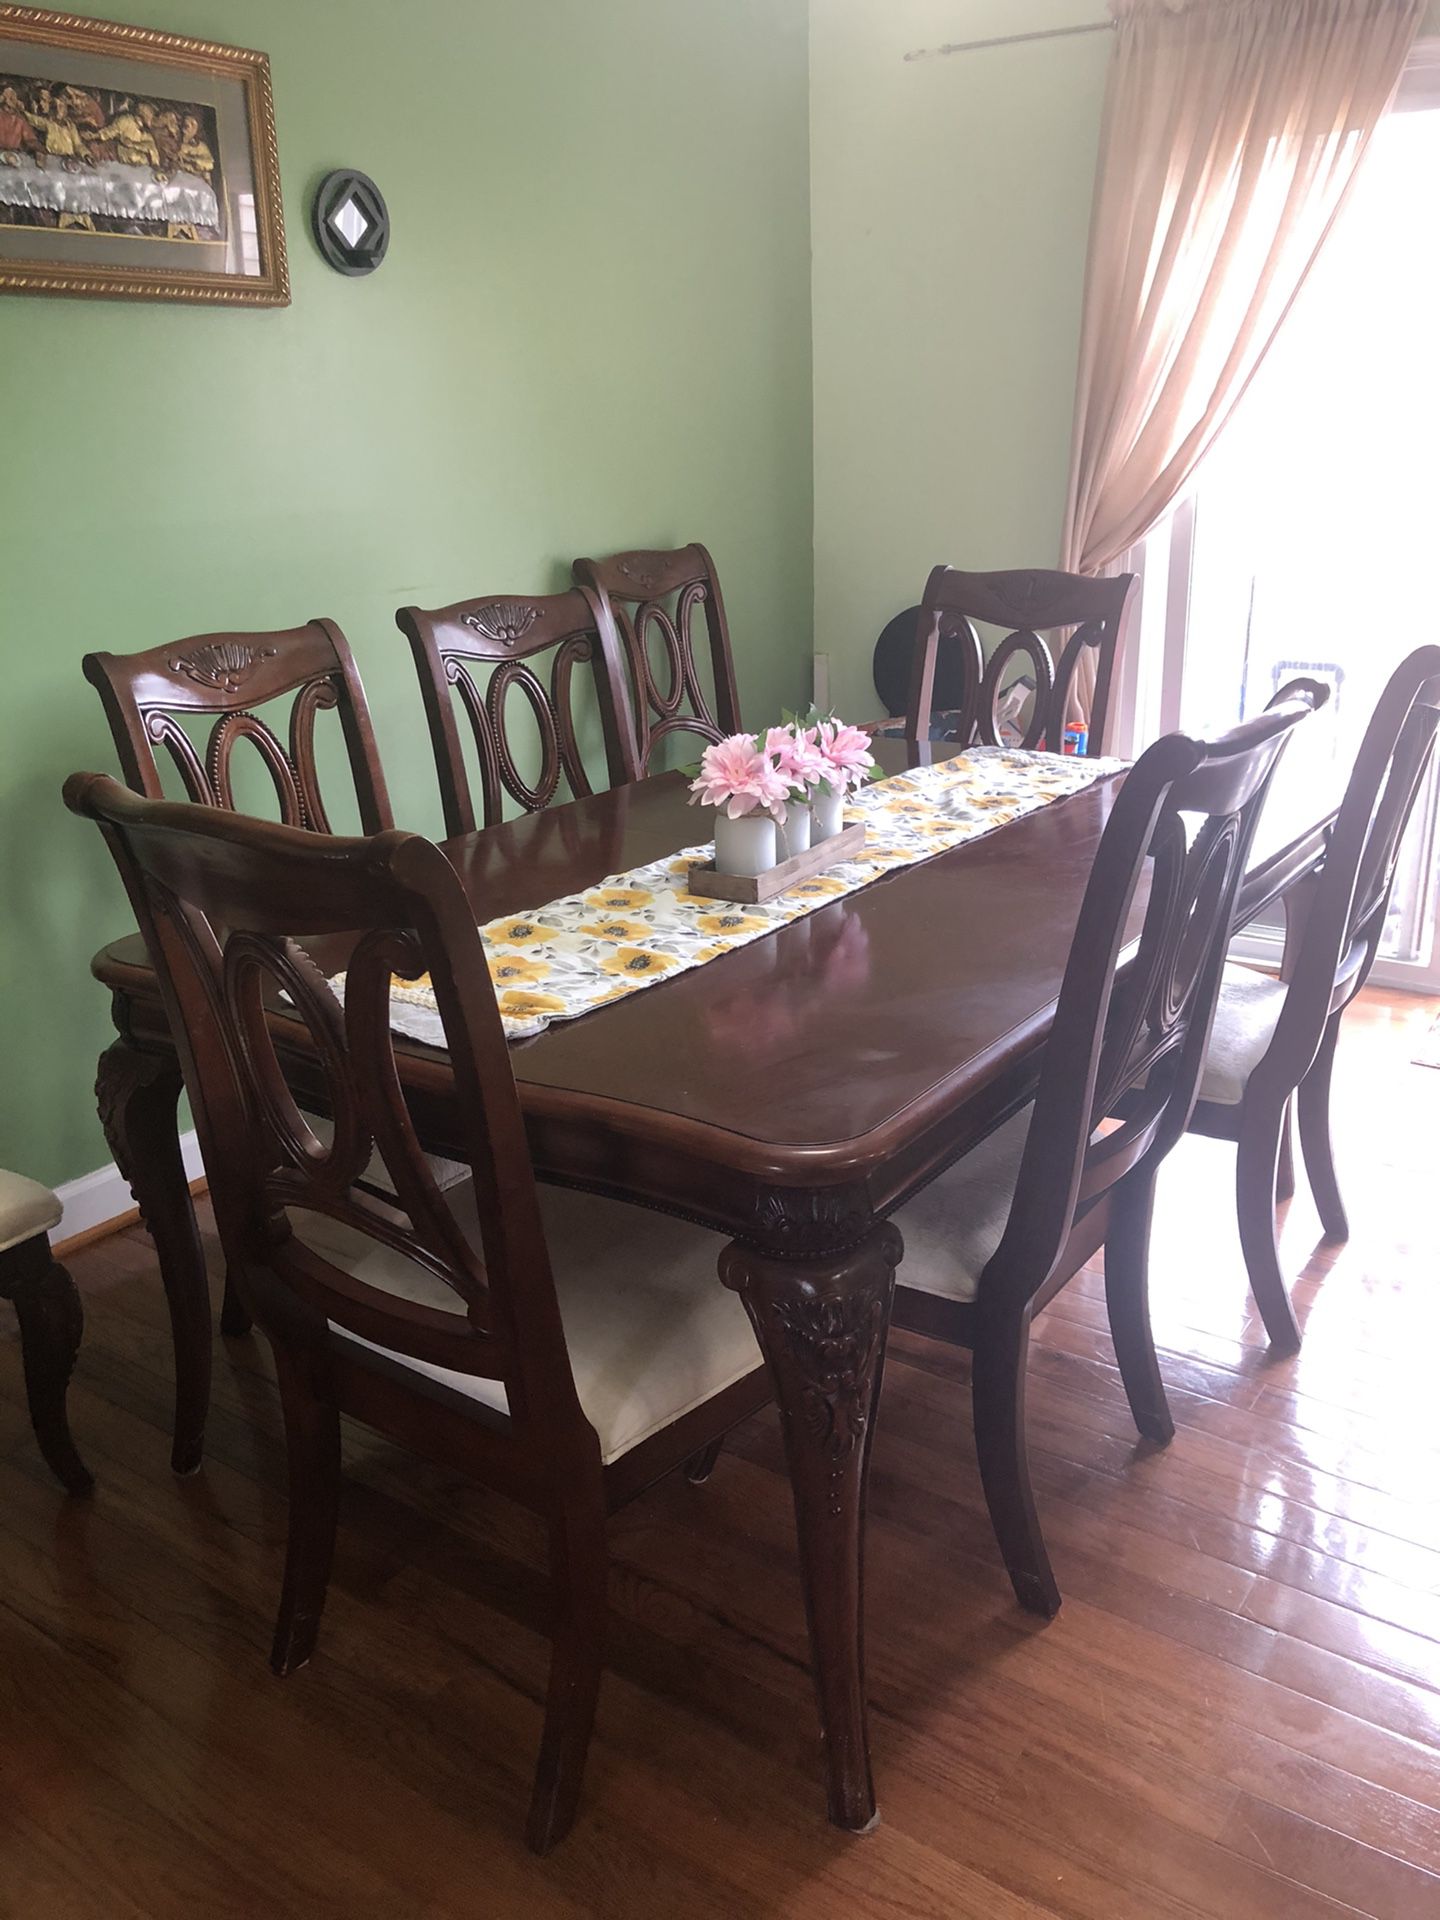 This a nice dinning table set of 8. It comes with 8 chair and a middle extension to sit 6 or 8 people, cherry color. Along with it there is a matchin